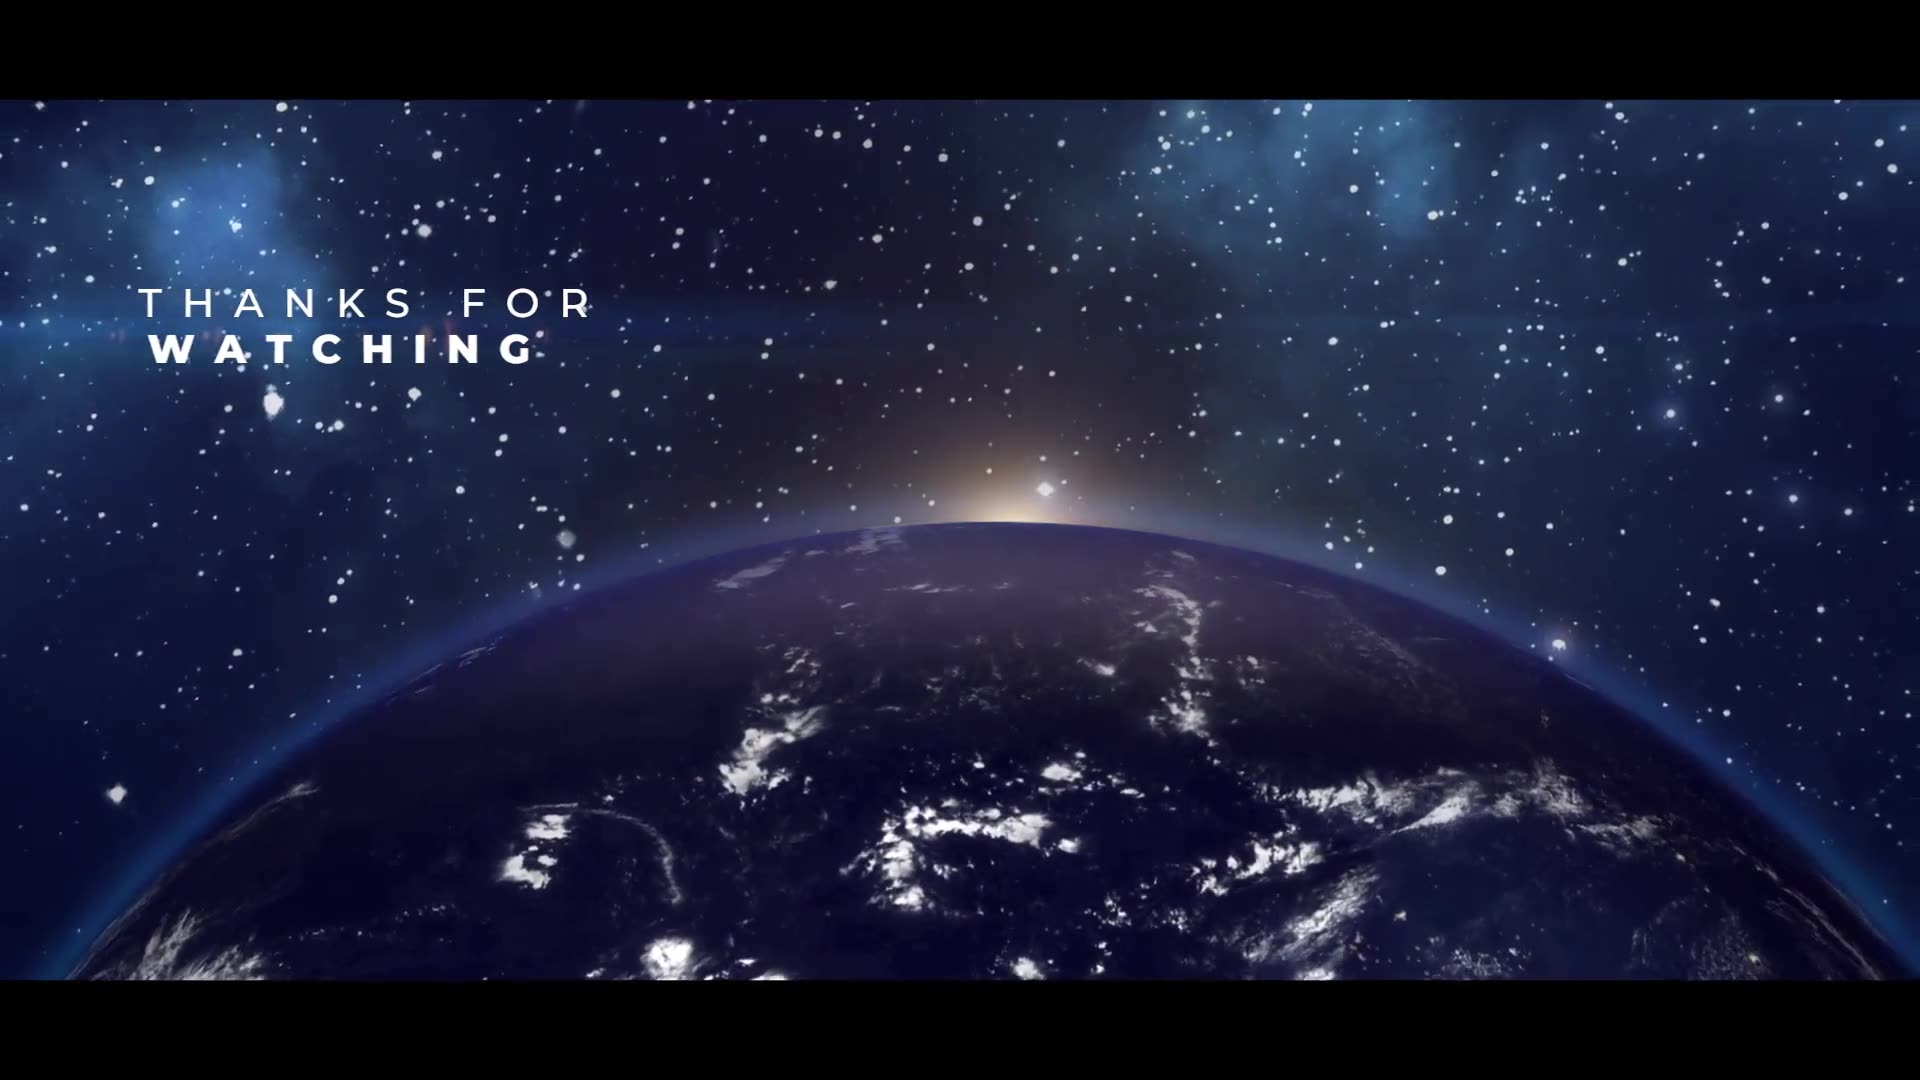 Earth Planet Titles - Download Videohive 23254564